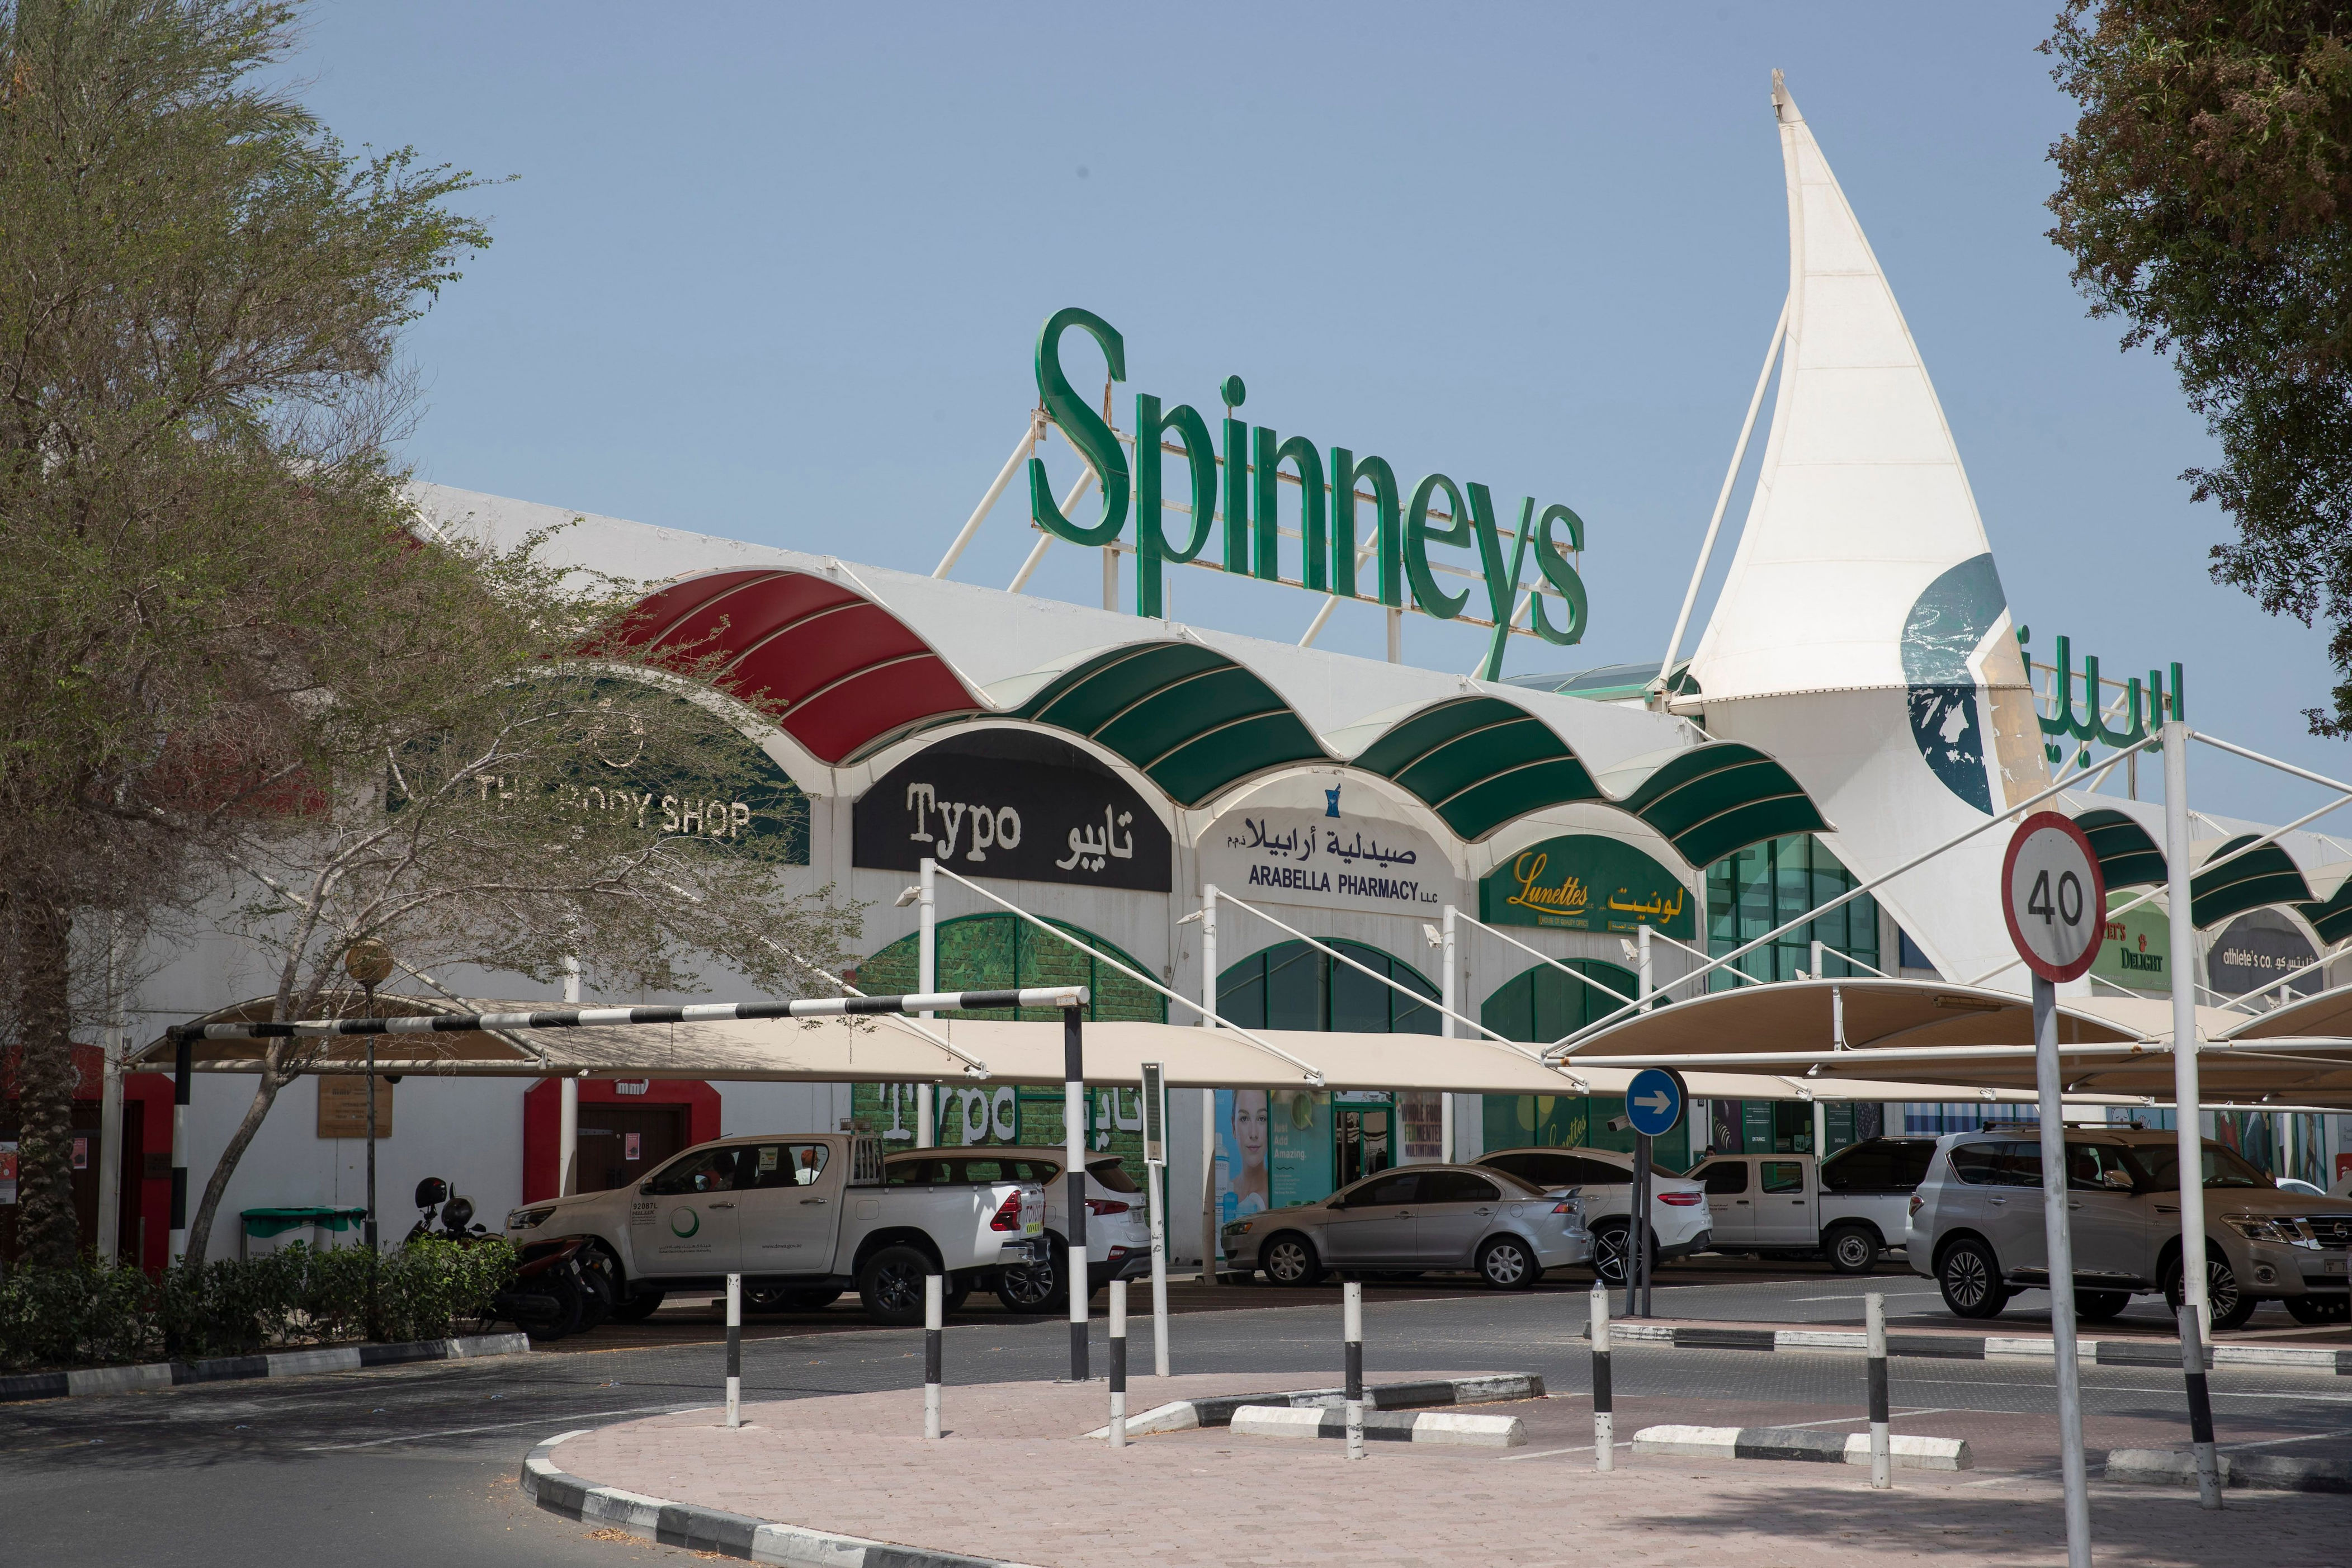 spinneys ipo: retailer increases retail offering on higher demand